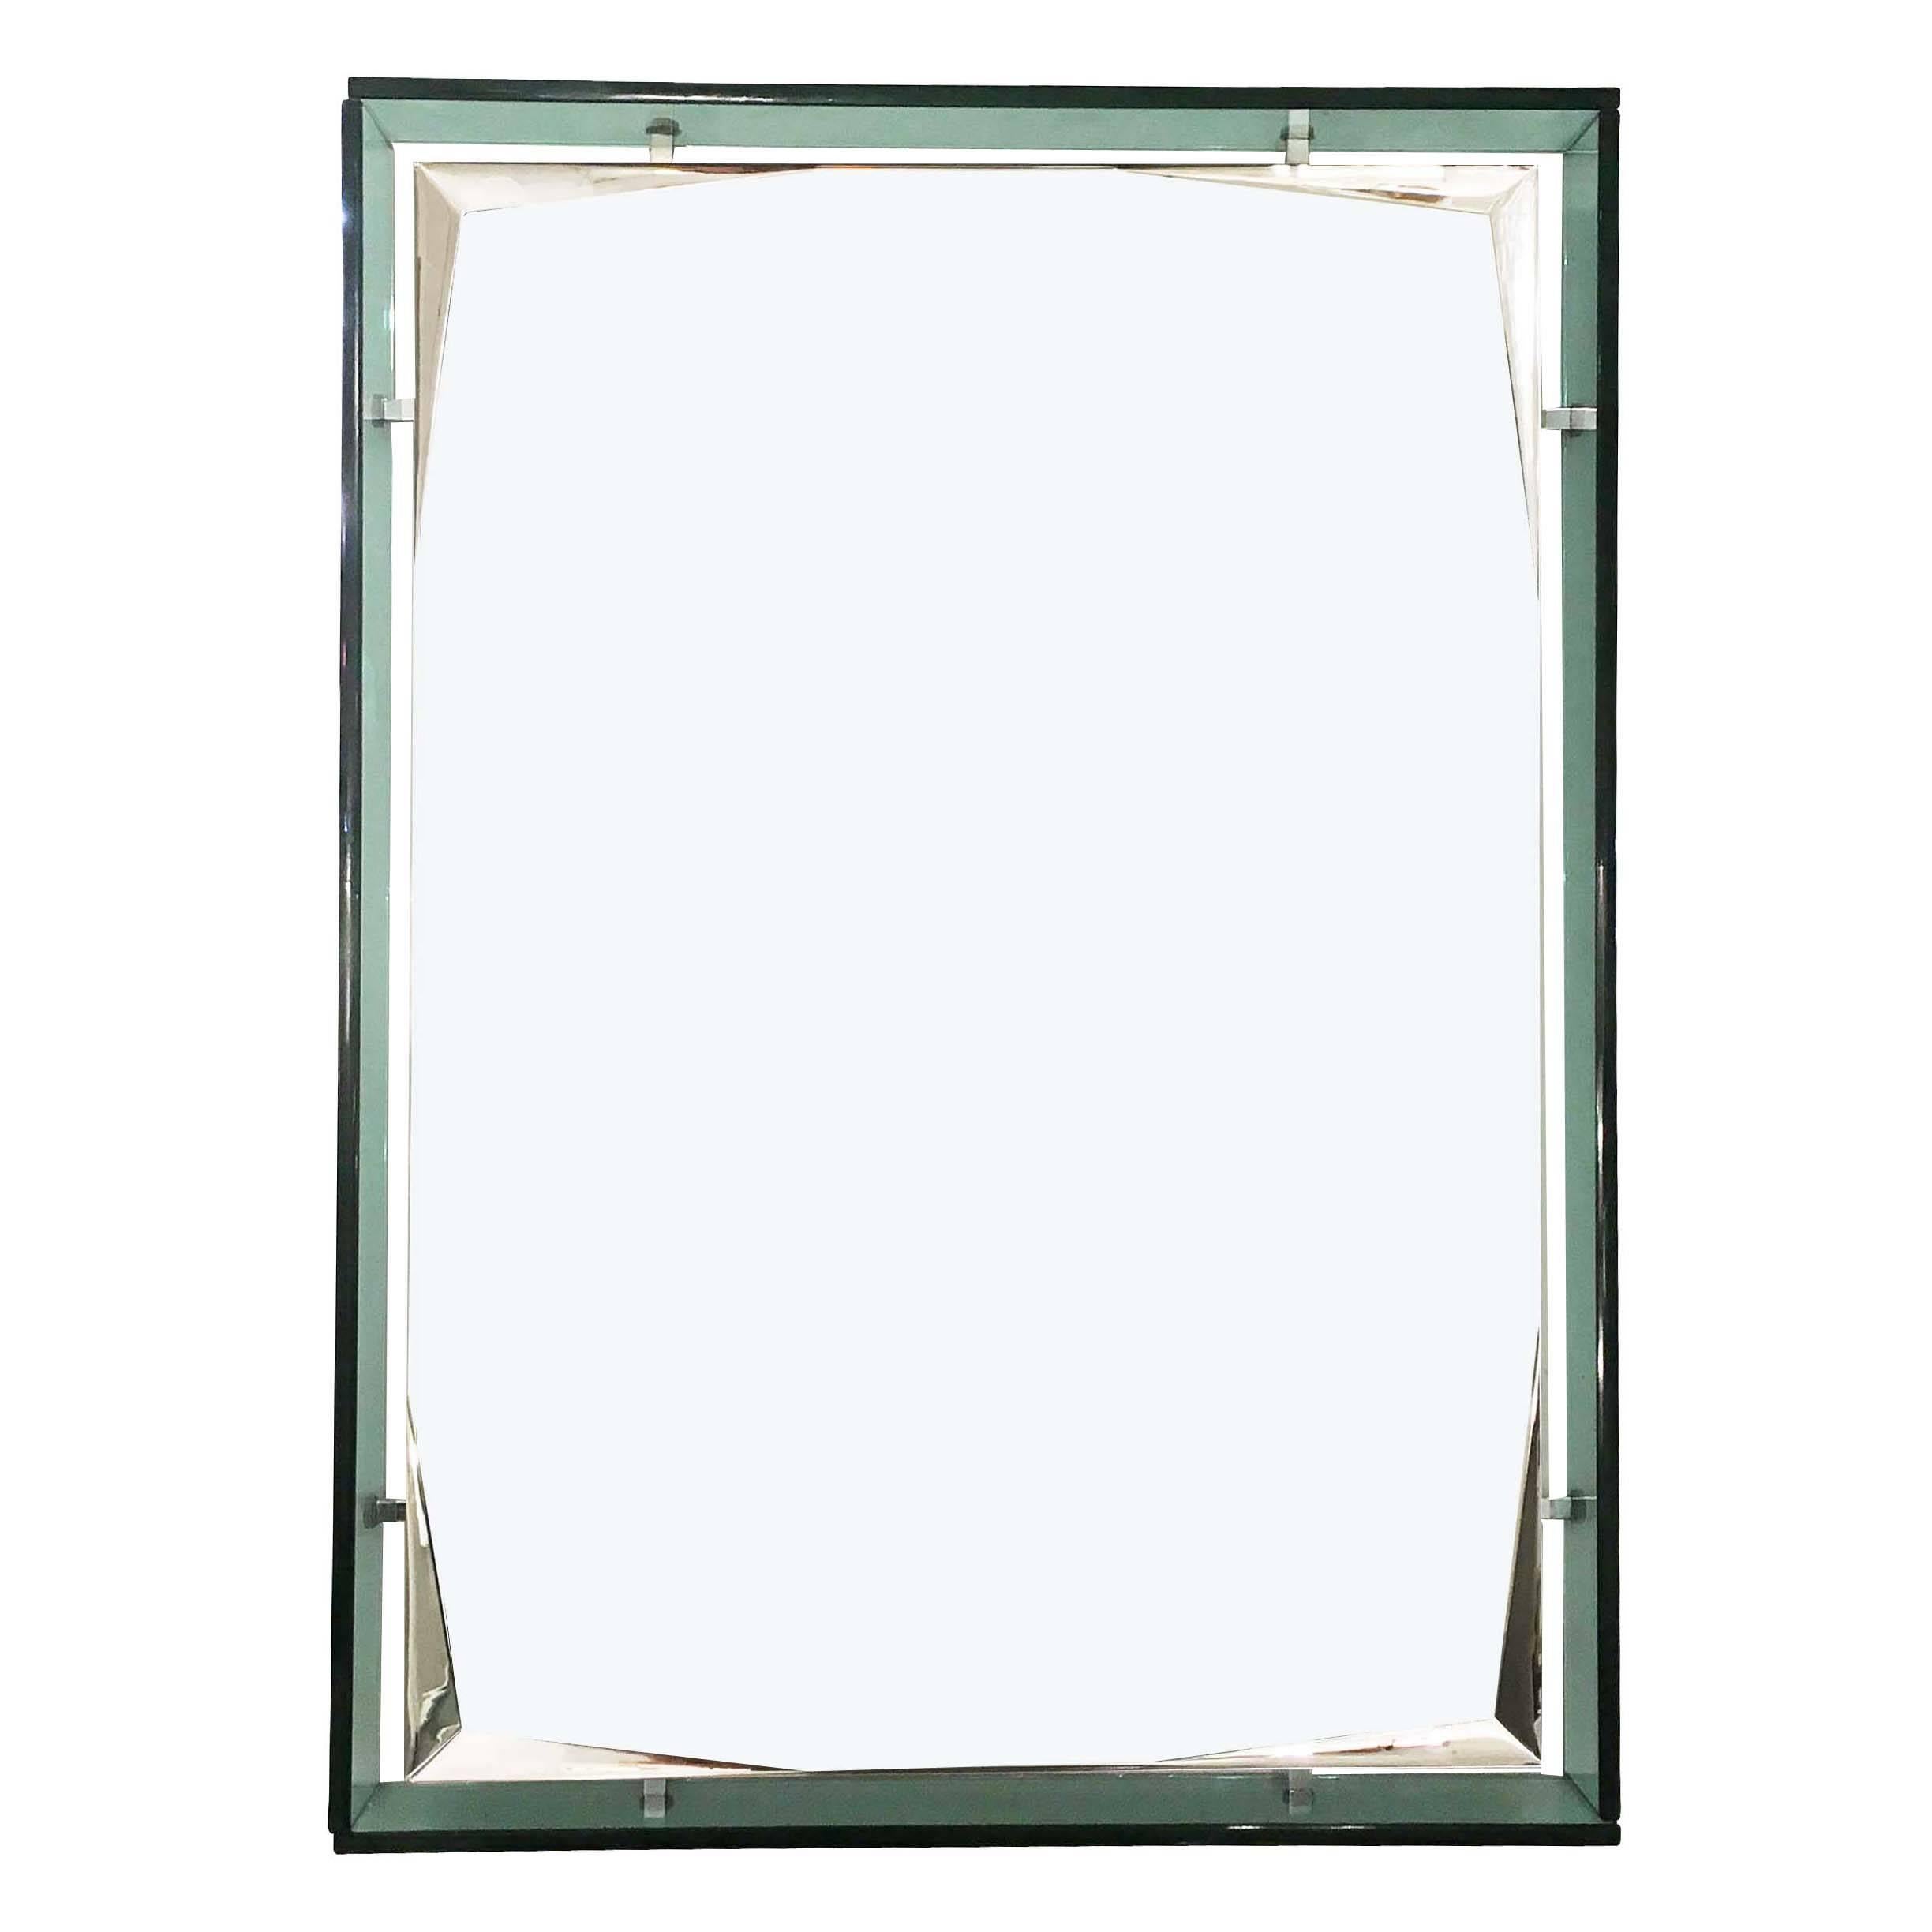 Turquoise mirror by Cristal Arte from the 1960s. The colored rectangular frame holds the mirrored section suspended via eight nickel-plated spacers. Small details like the internally etched corners of the mirror elevate the piece.

Condition: